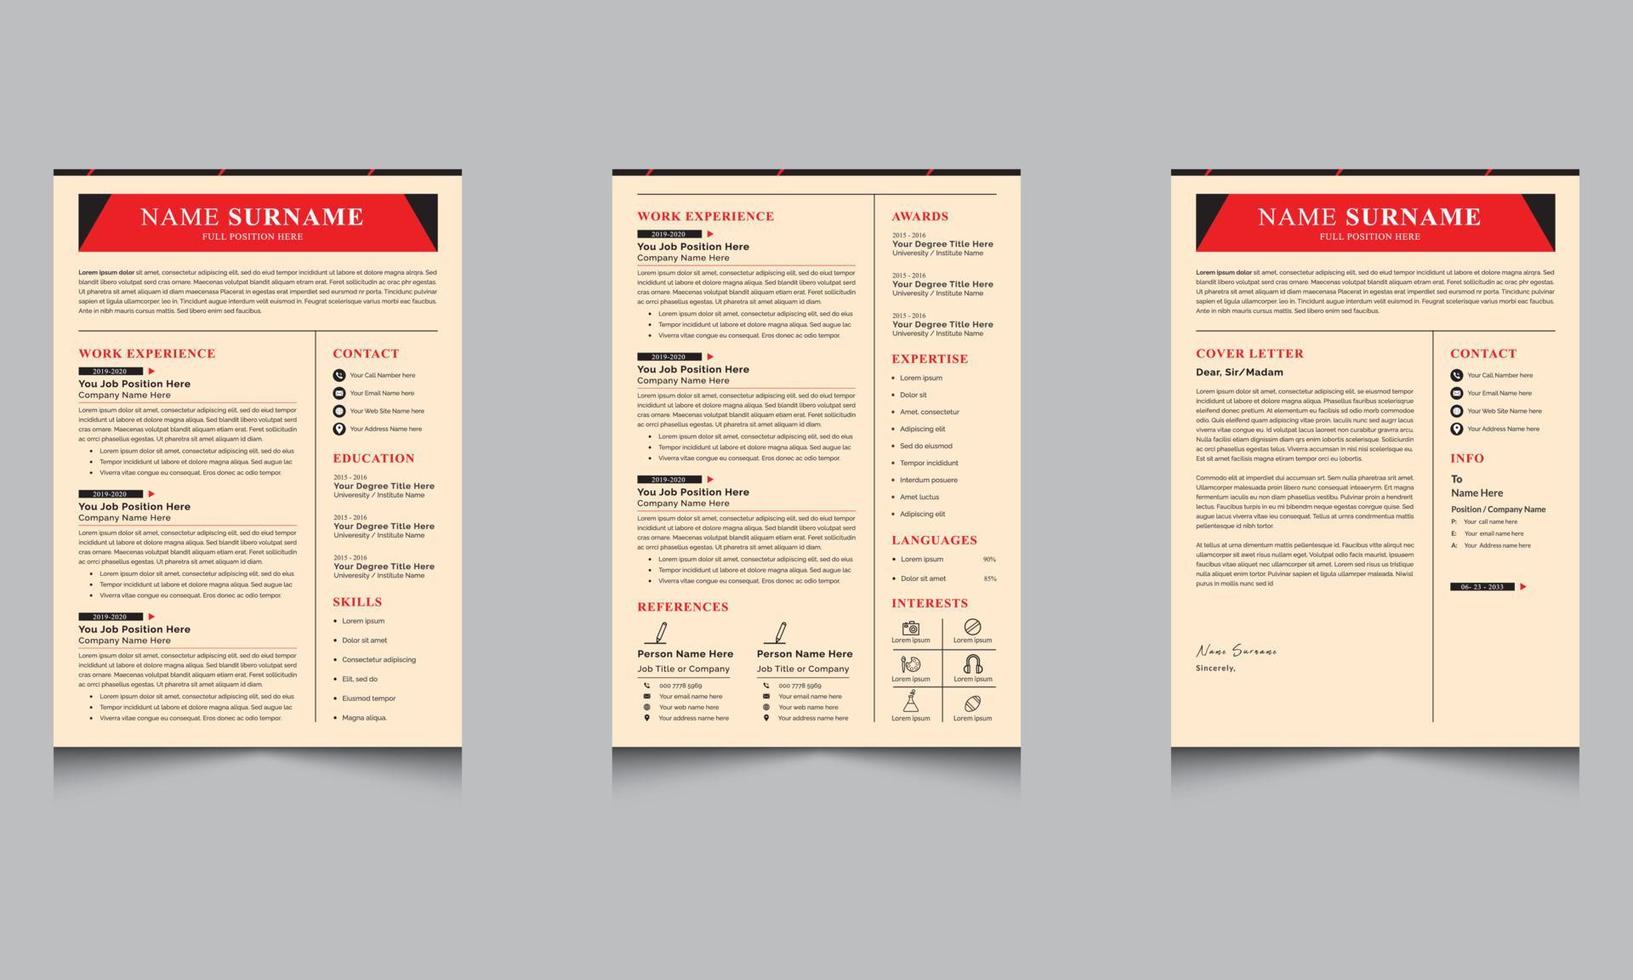 Red resume template CV Layout Vector Template for Business Job Applications